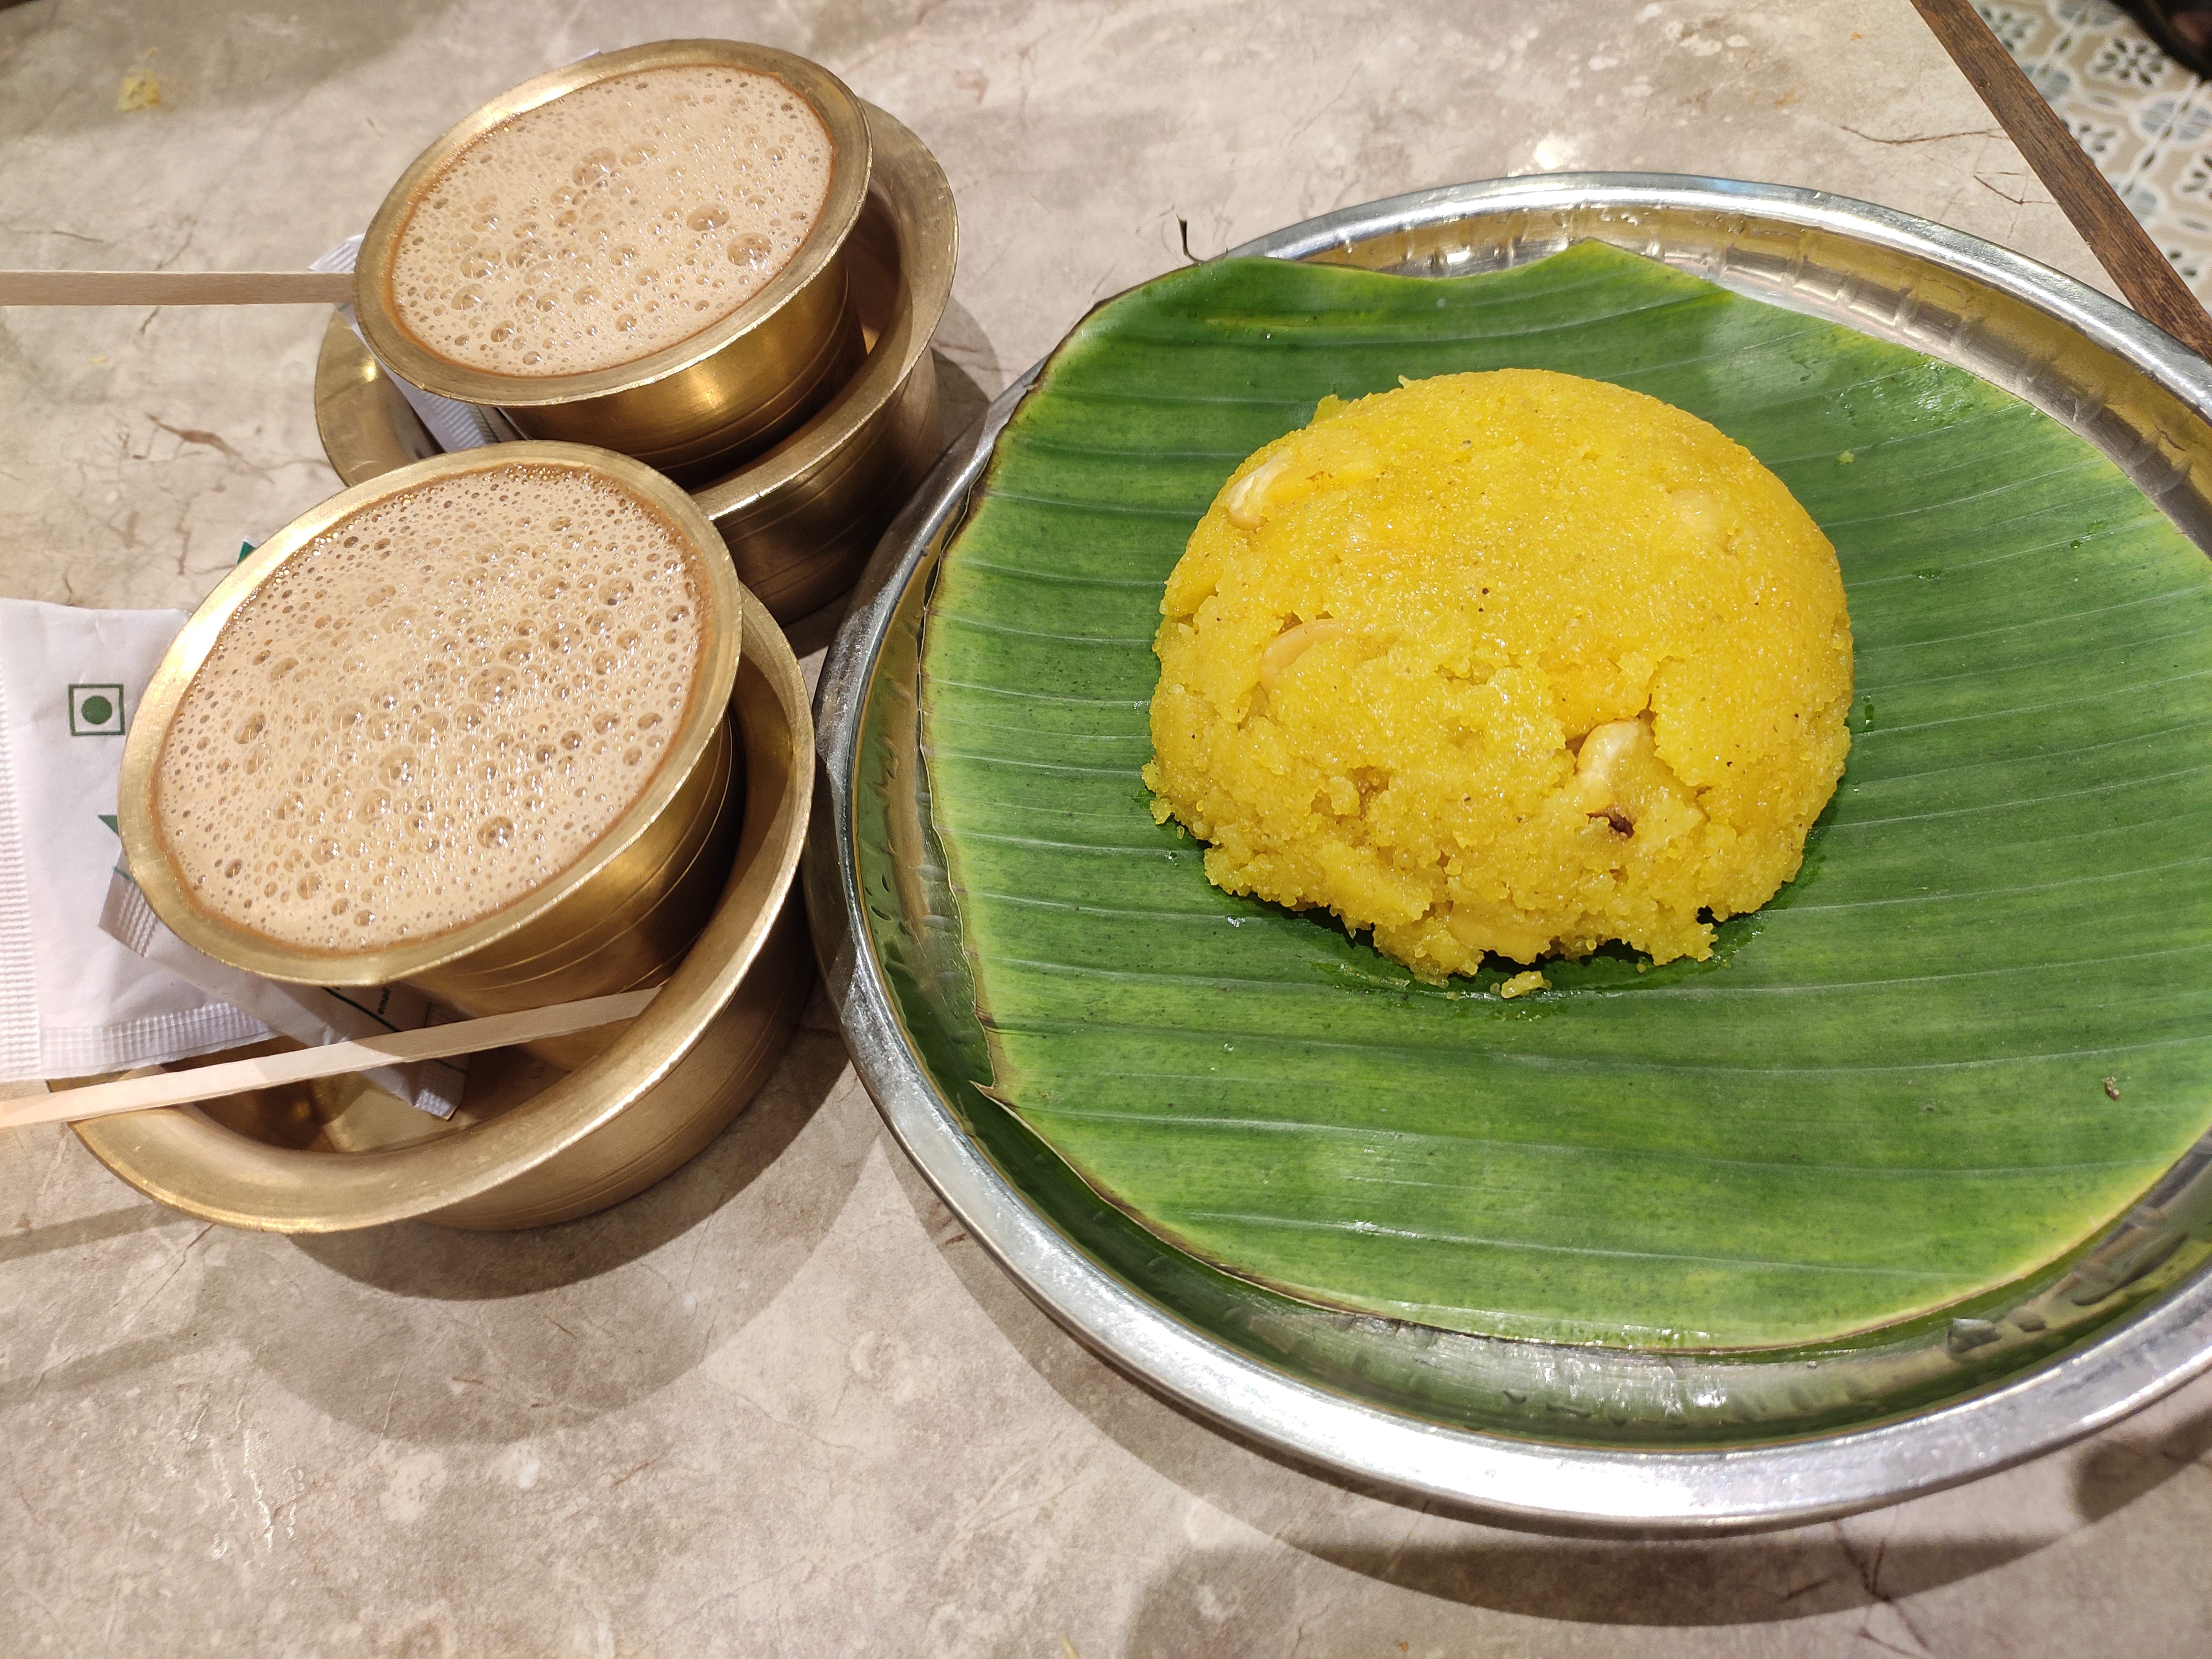 Food,Cuisine,Dish,Ingredient,Rice,Breakfast,Meal,Produce,Comfort food,South Indian cuisine